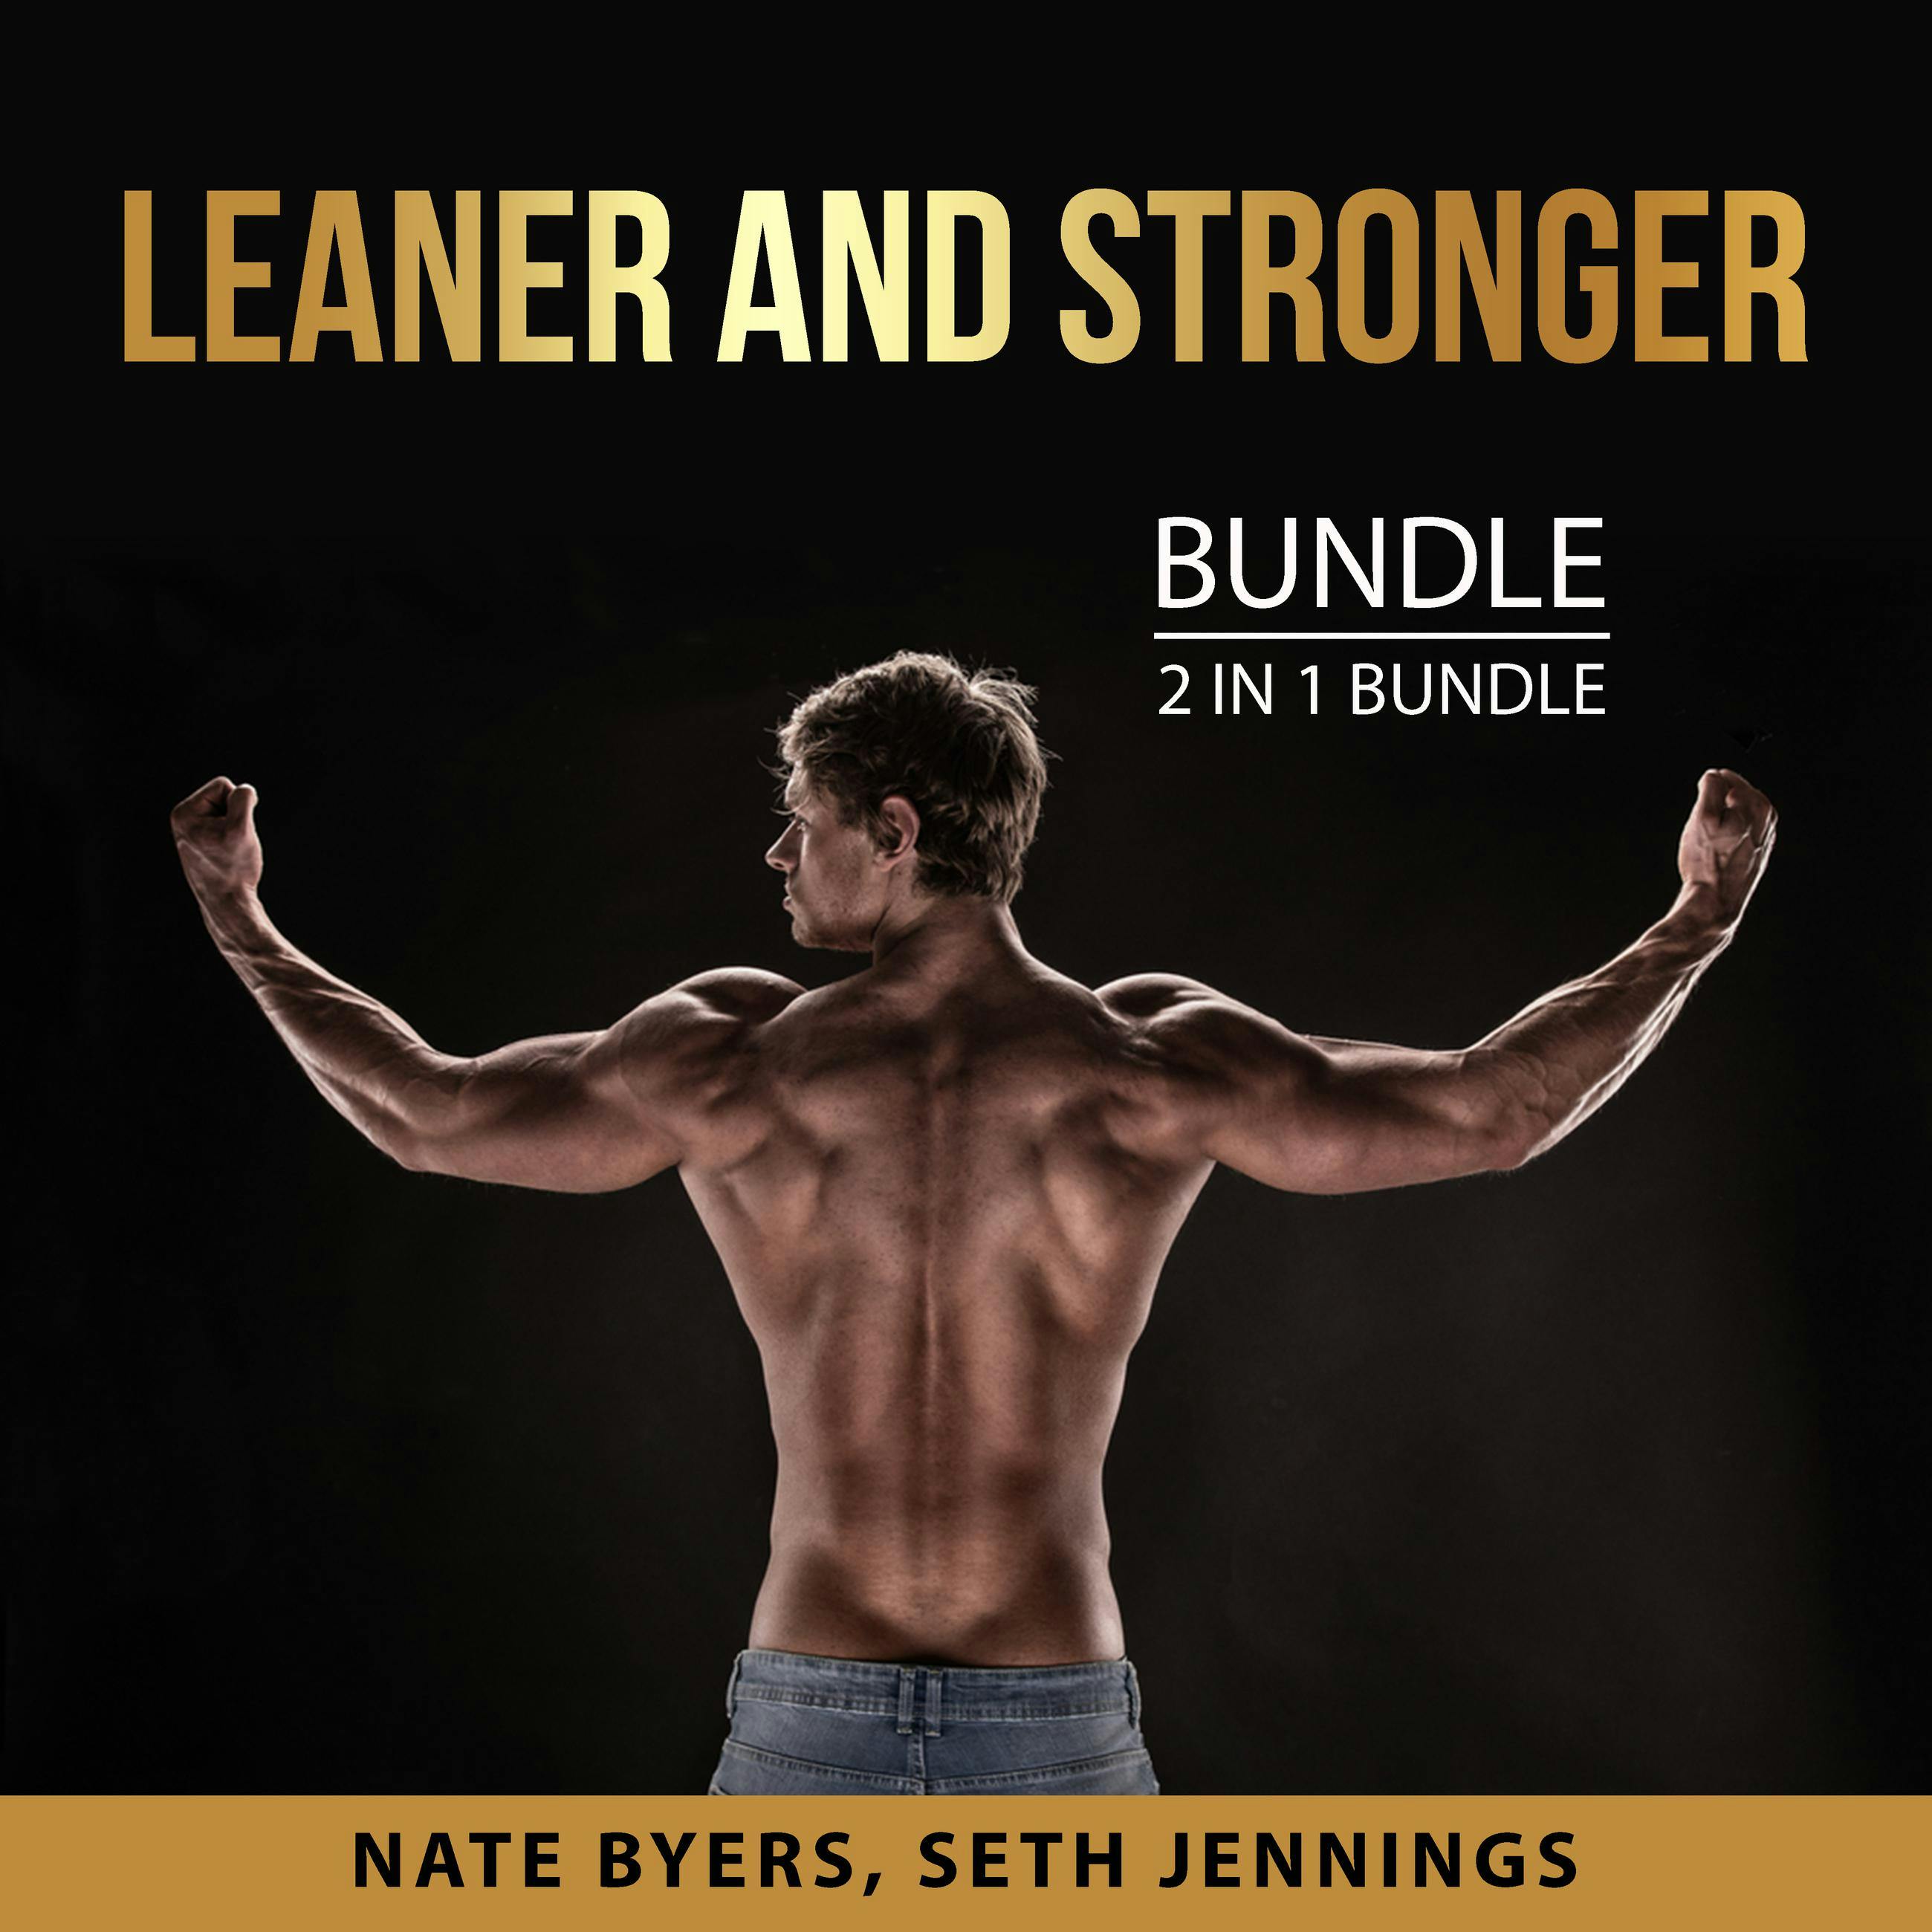 Leaner and Stronger Bundle, 2 in 1 Bundle: Easy Guide to Muscle Building and Built Like a Spartan - undefined